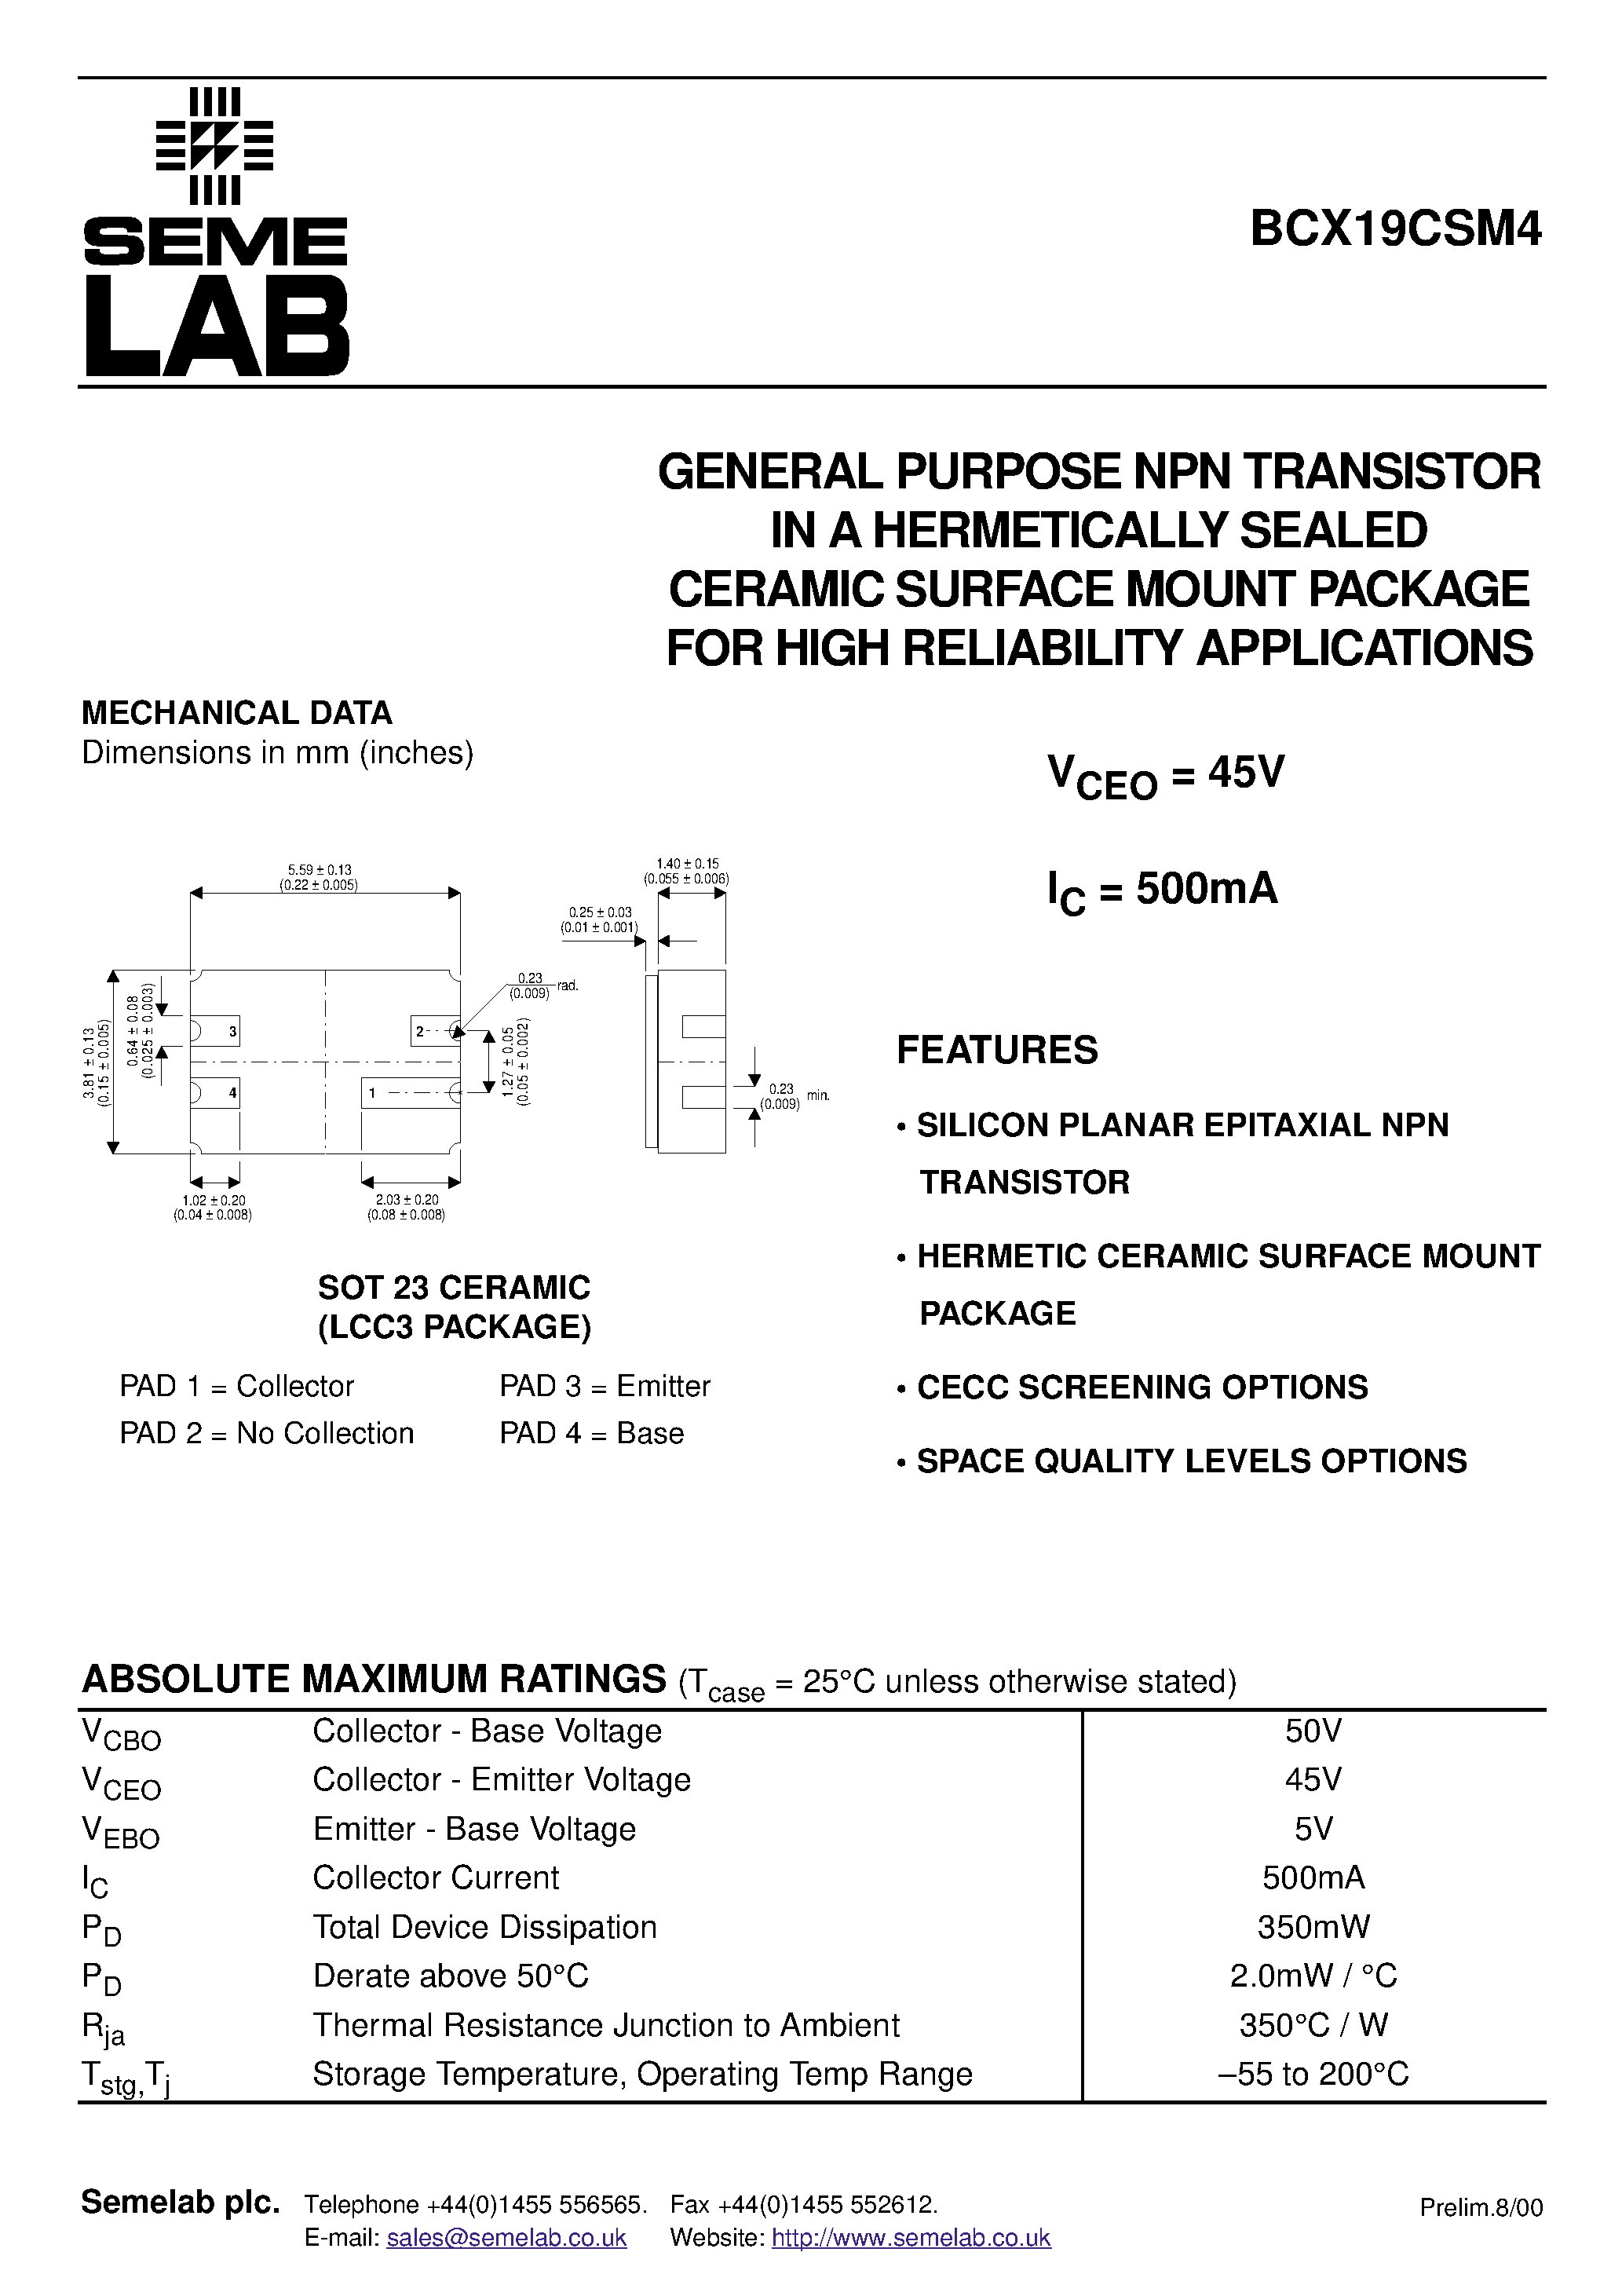 Даташит BCX19CSM4 - GENERAL PURPOSE NPN TRANSISTOR IN A HERMETICALLY SEALED CERAMIC SURFACE MOUNT PACKAGE FOR HIGH RELIABILITY APPLICATIONS страница 1